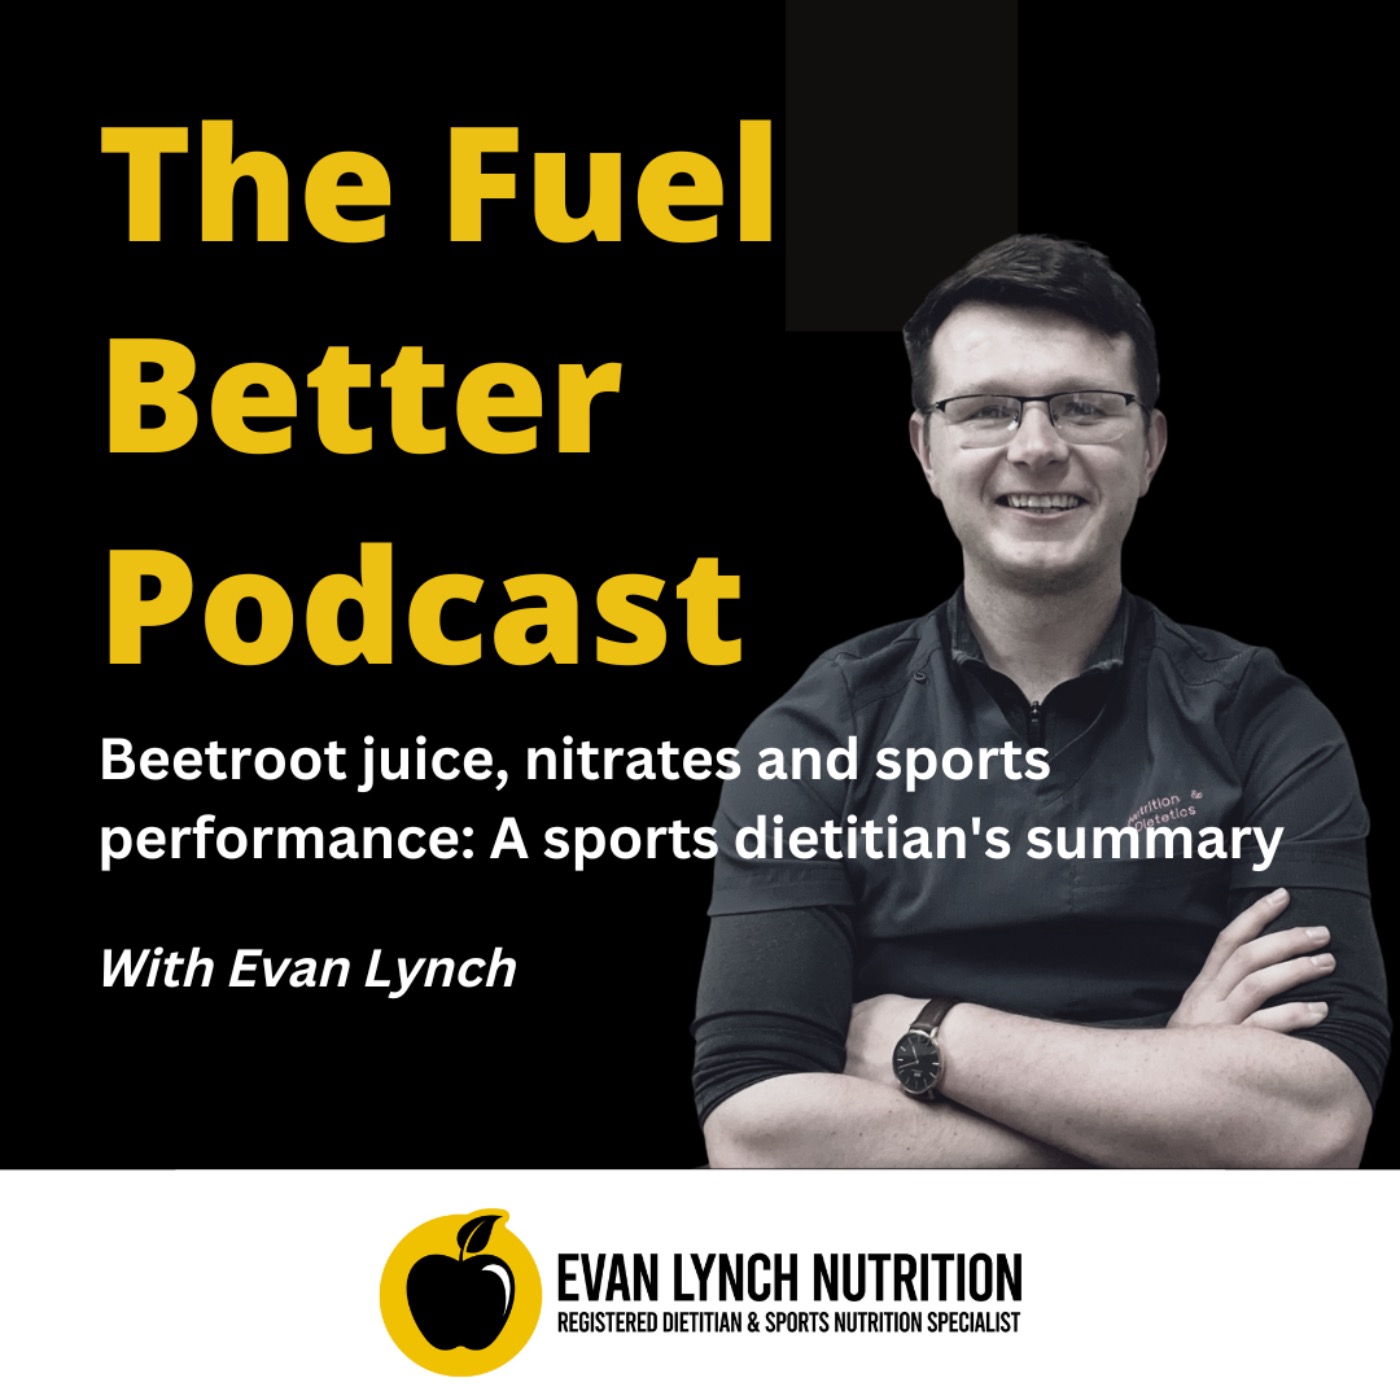 Beetroot juice, nitrates and sports performance: A sports dietitian's summary